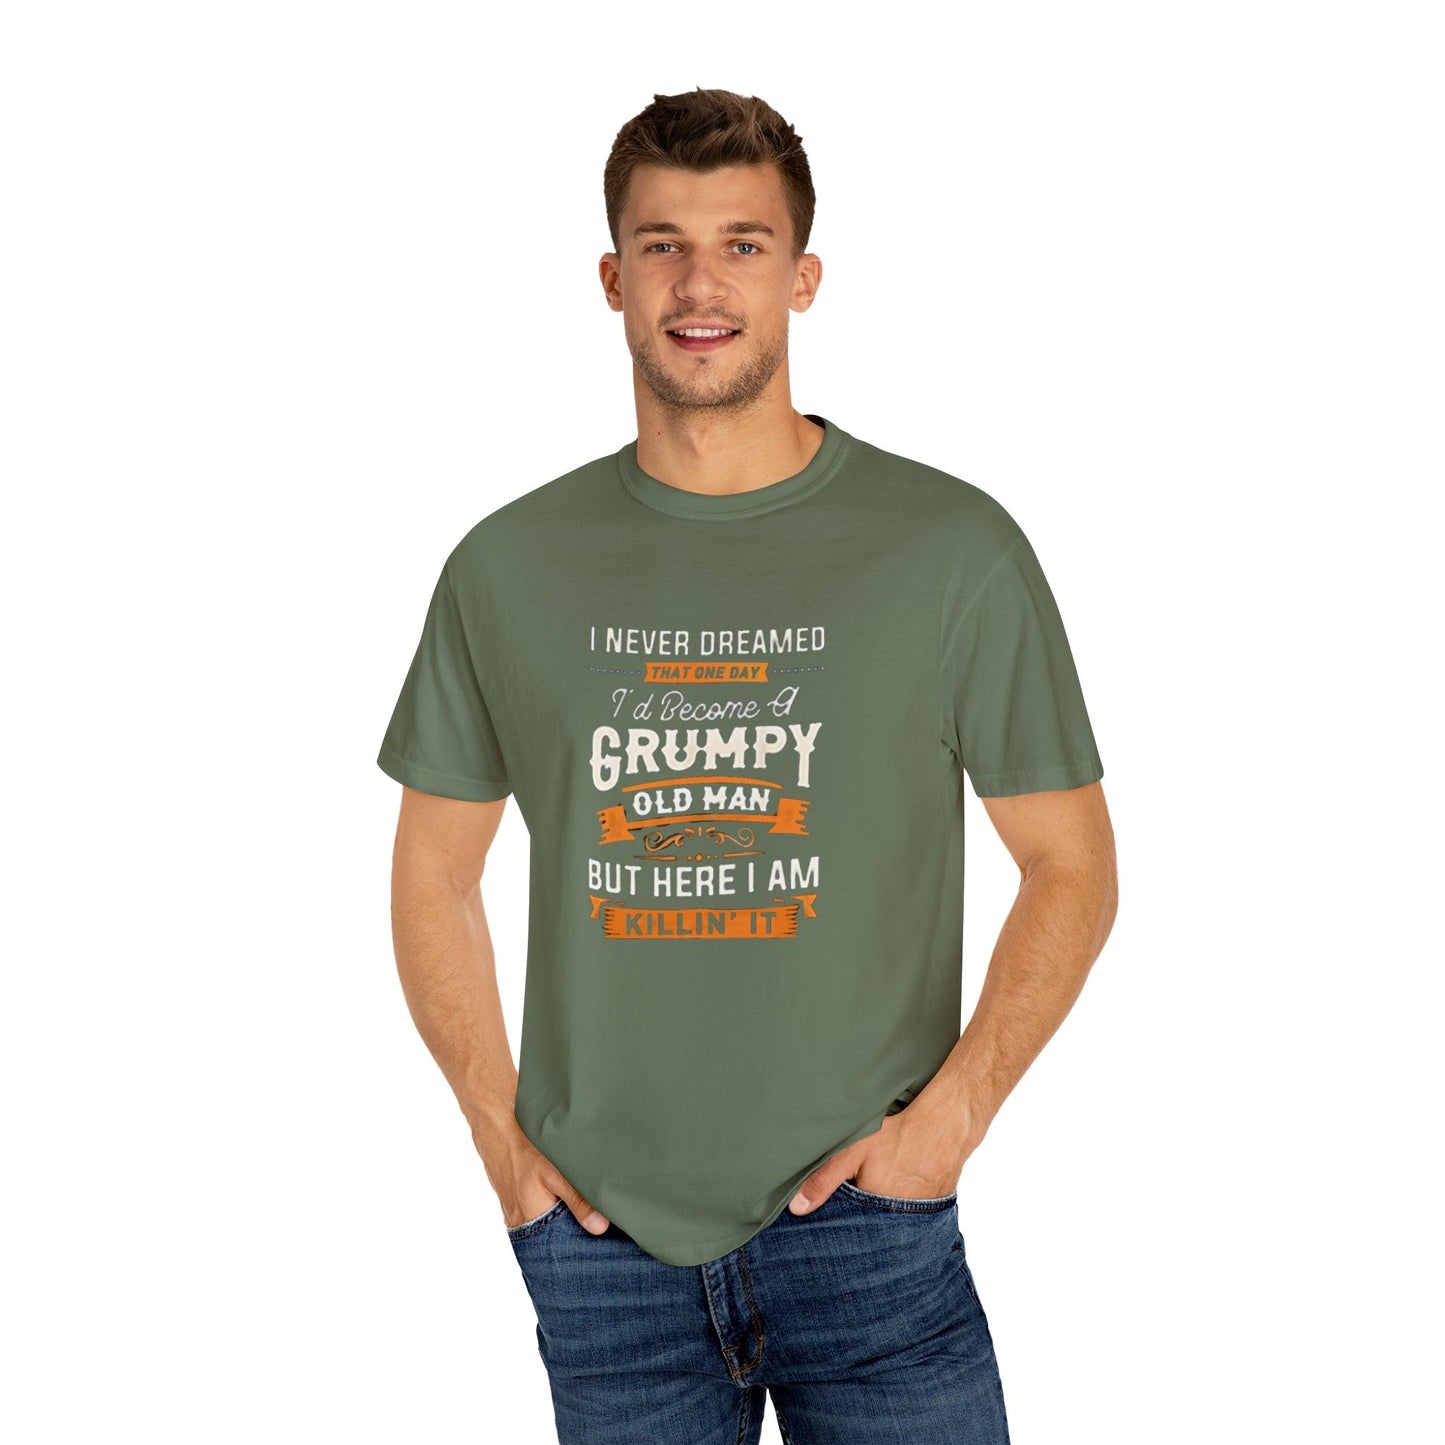 Grumpy and Proud: The Bold T-Shirt for Seniors with Attitude - Pandaize